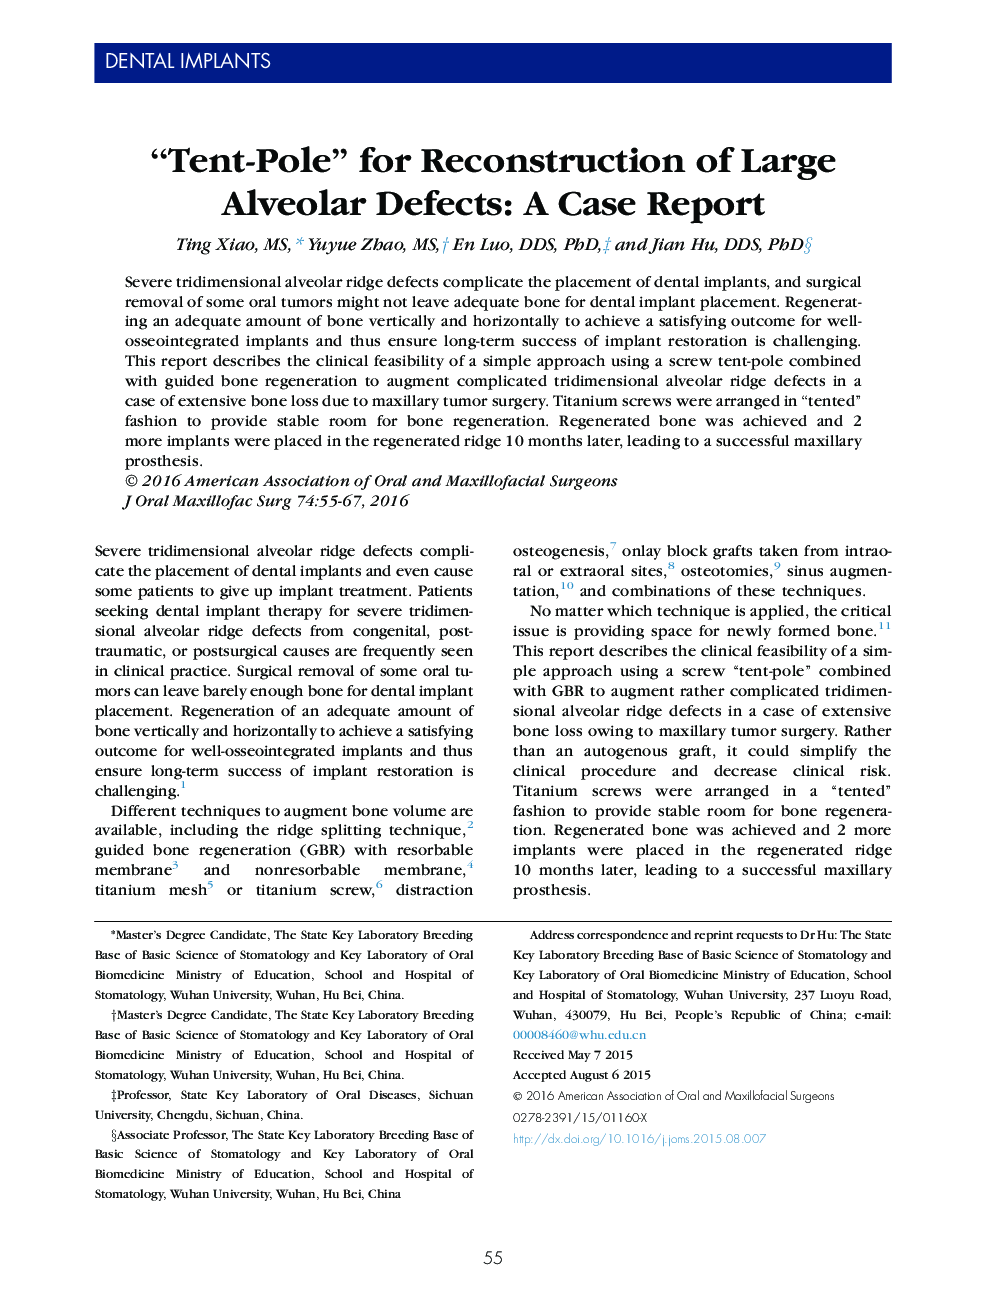 “Tent-Pole” for Reconstruction of Large Alveolar Defects: A Case Report